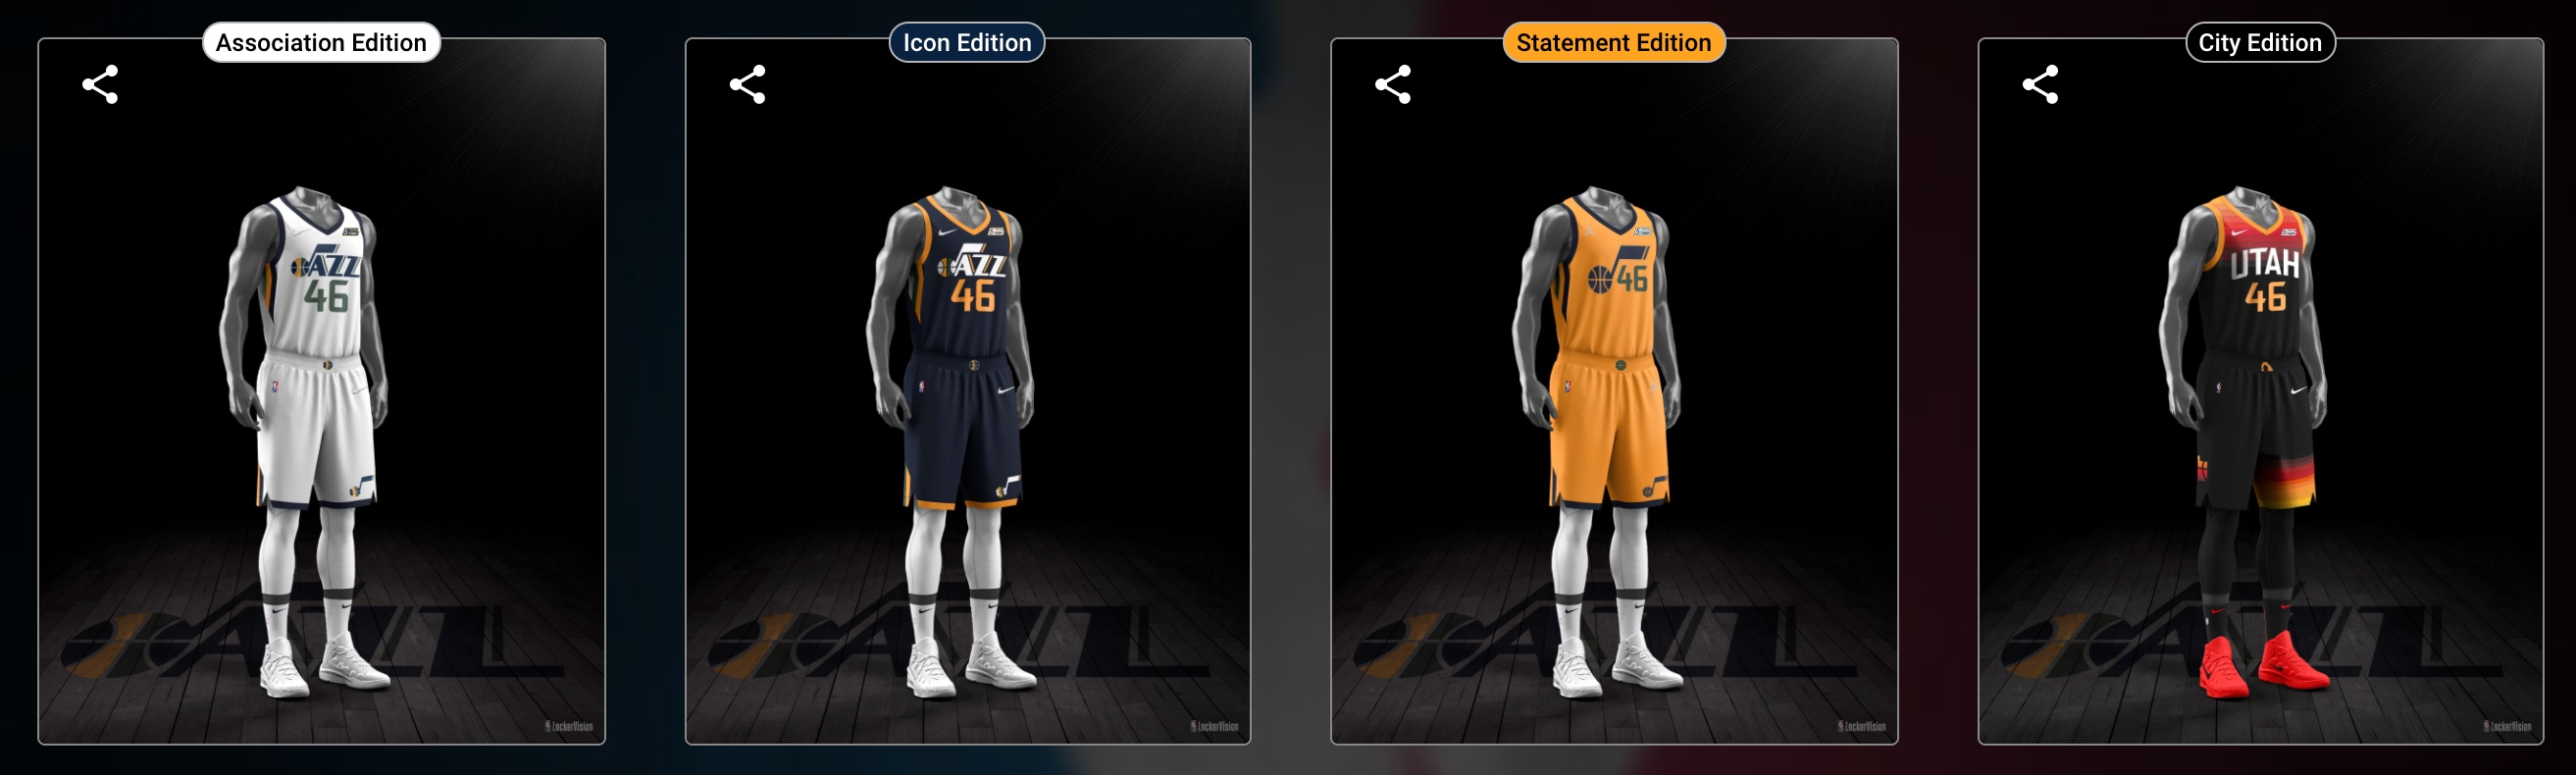 Utah Jazz to change team's base colors to black and white, owner hints